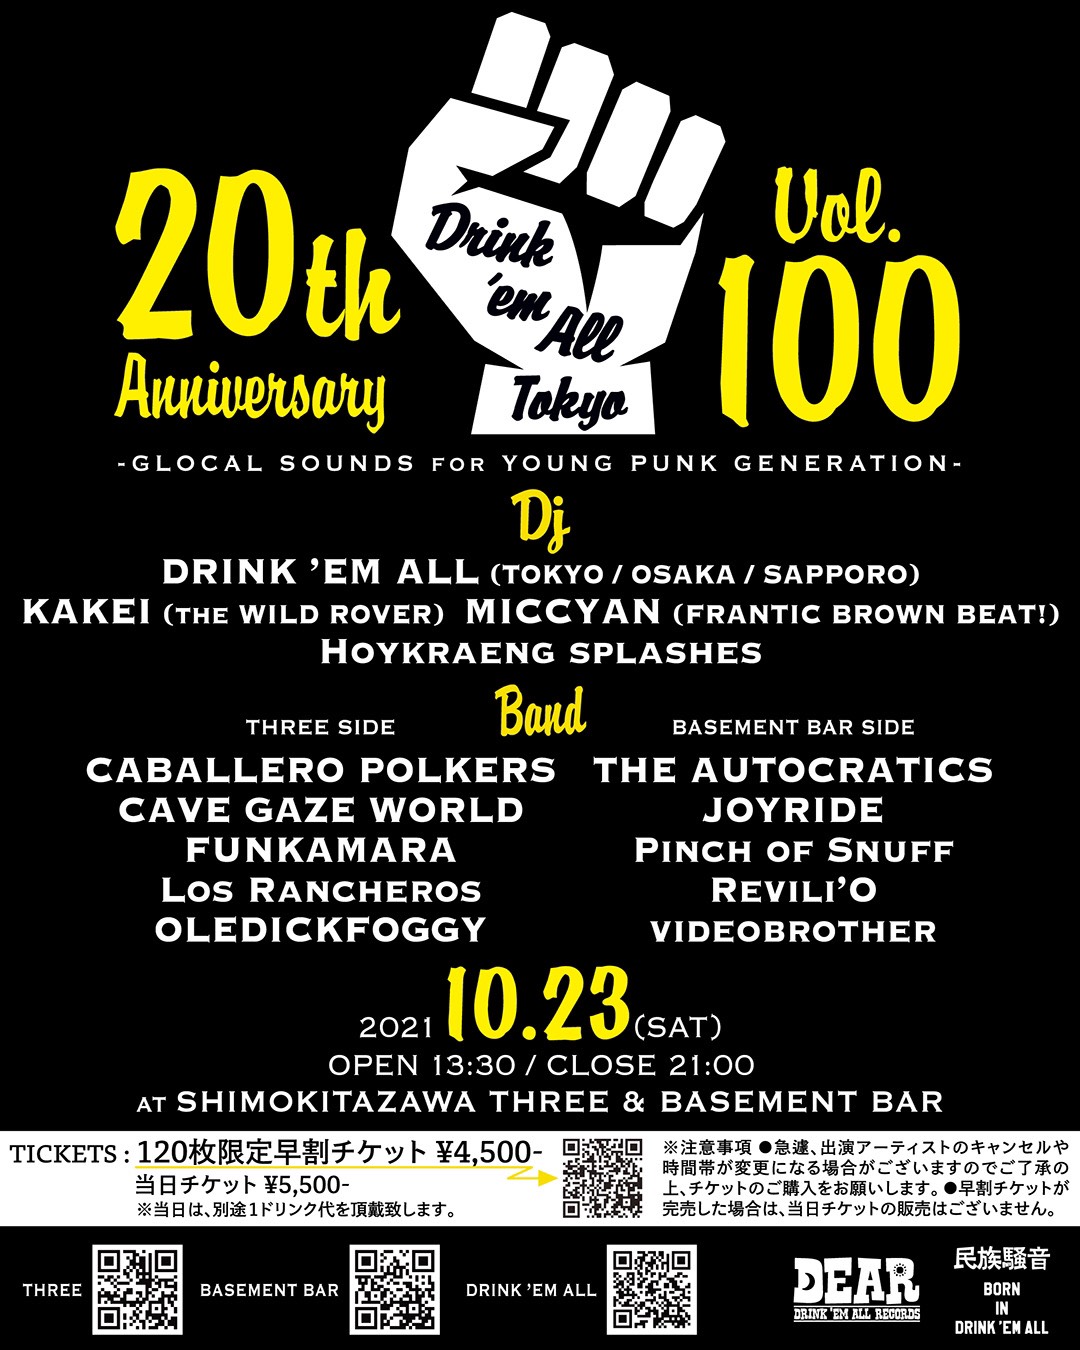 DRINK 'EM ALL TOKYO VOL.100 [20th ANNIVERSARY SPECIAL] -GLOCAL SOUNDS for YOUNG PUNK GENERATION-